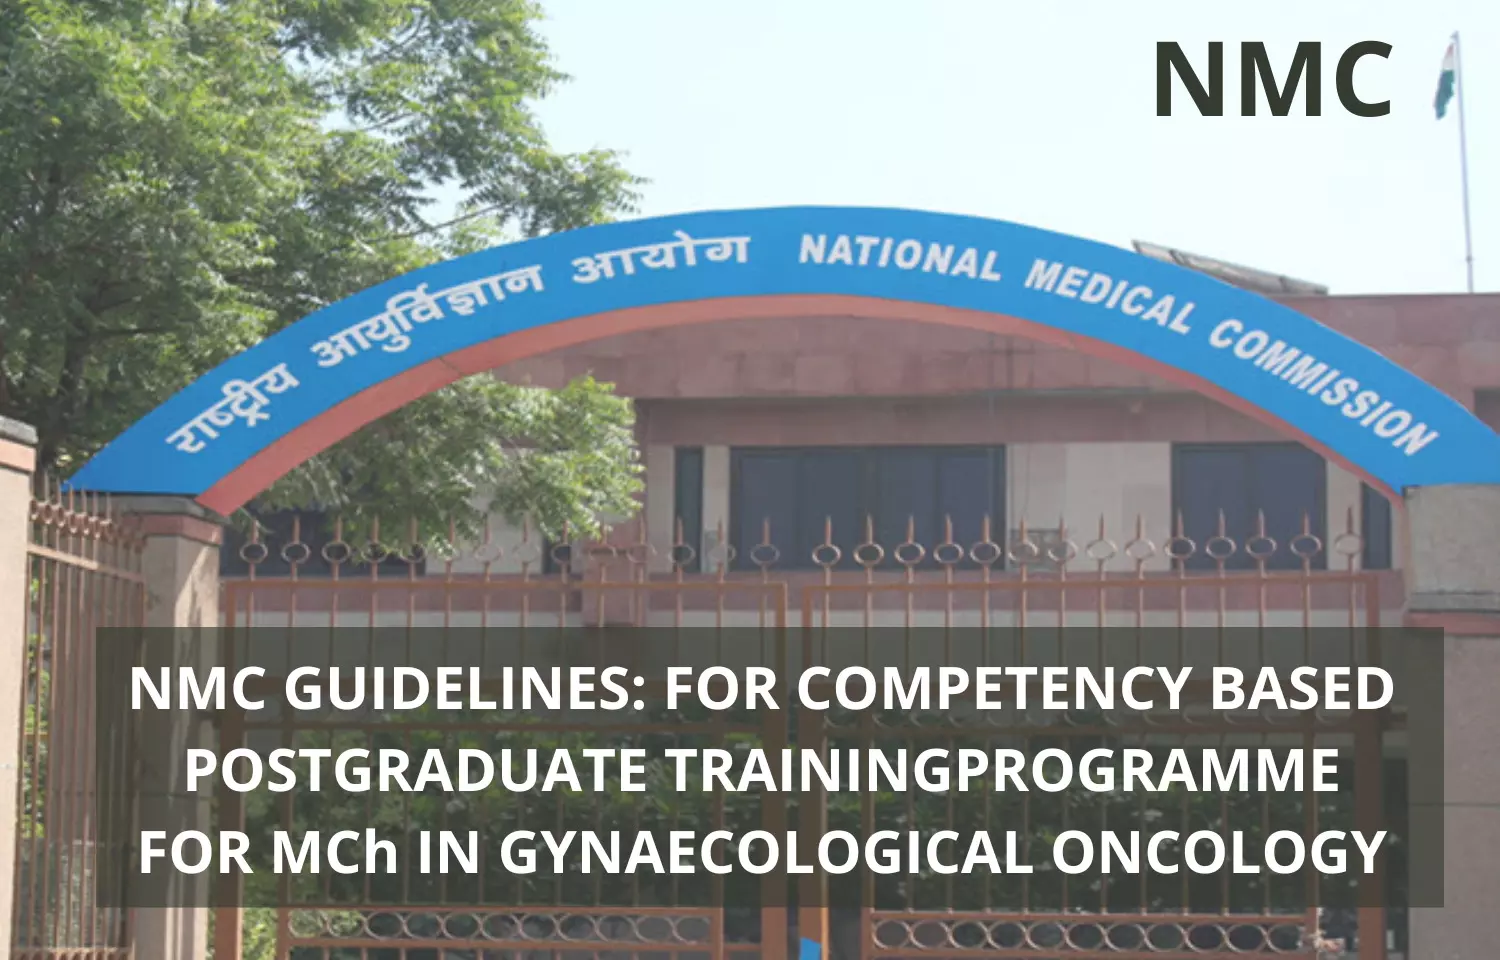 NMC Guidelines Competency-Based Training Programme For MCh Gynaecological Oncology